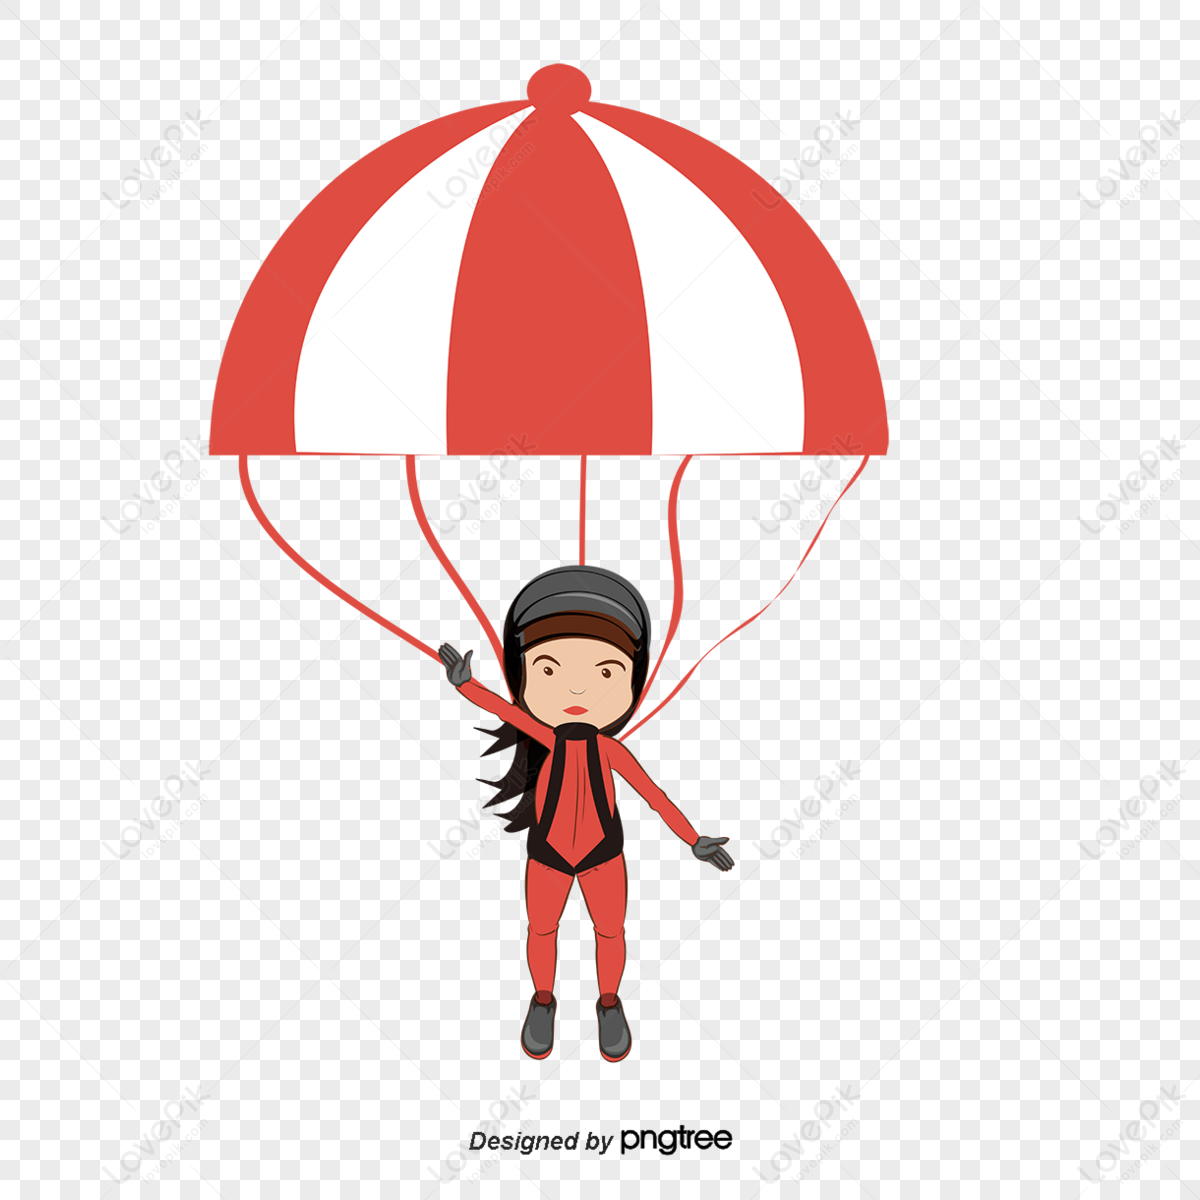 Soldier Parachute PNG Images With Transparent Background | Free ...